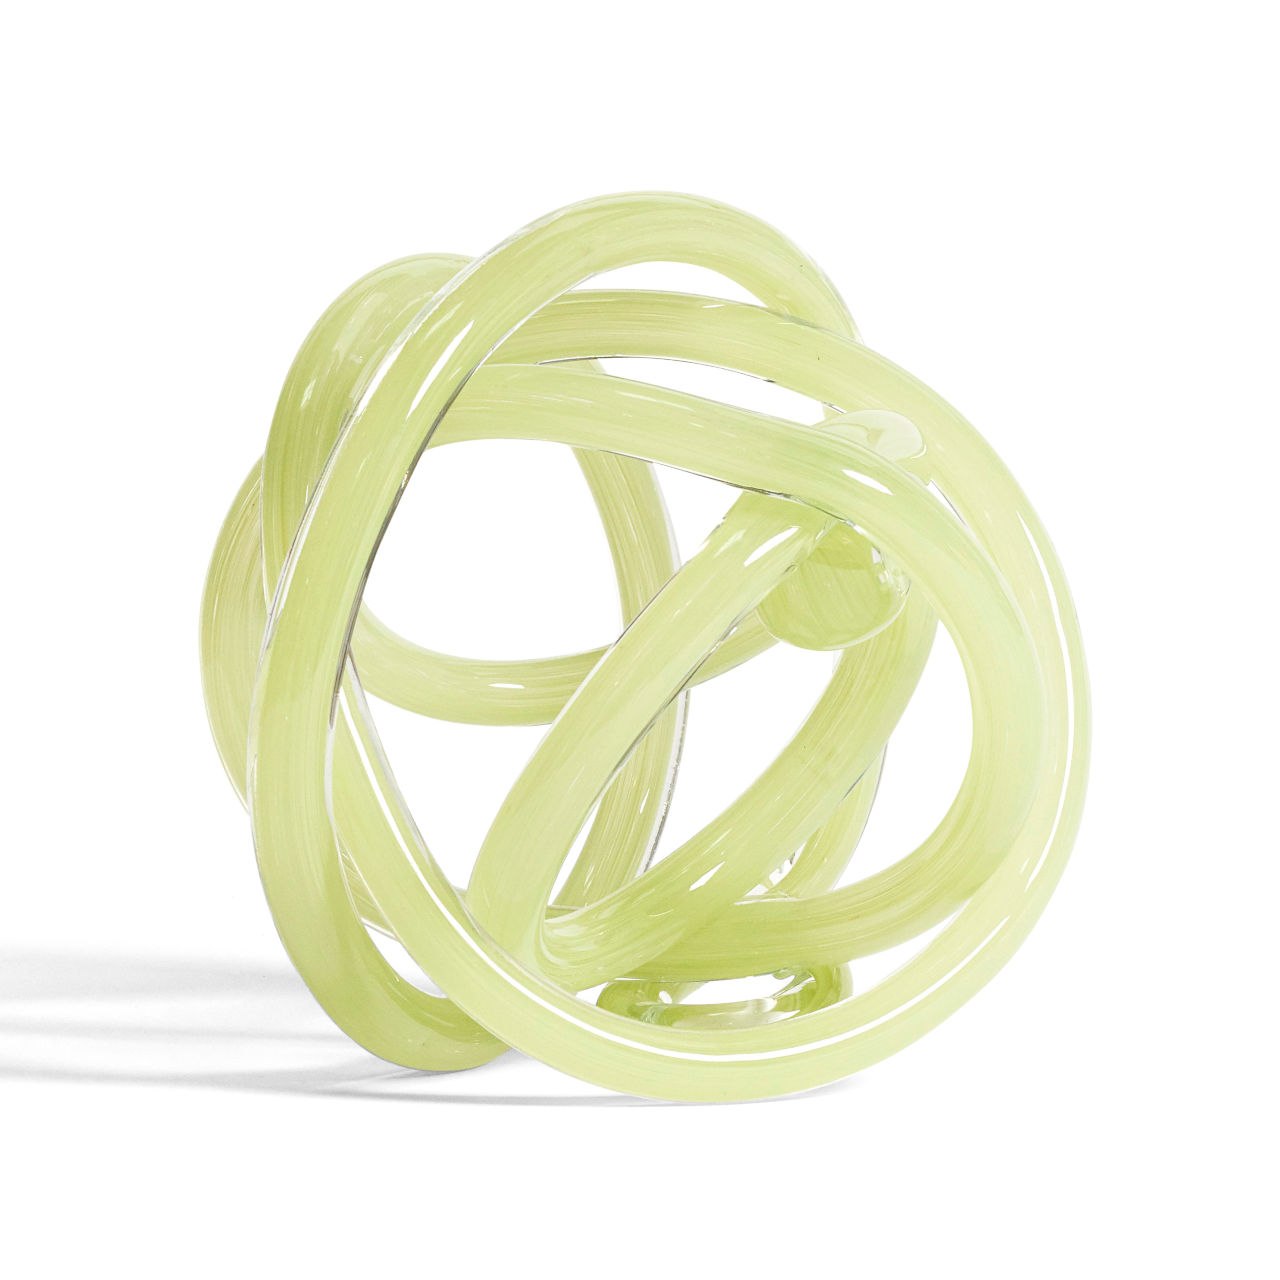 HAY Knot - Light Green - Large